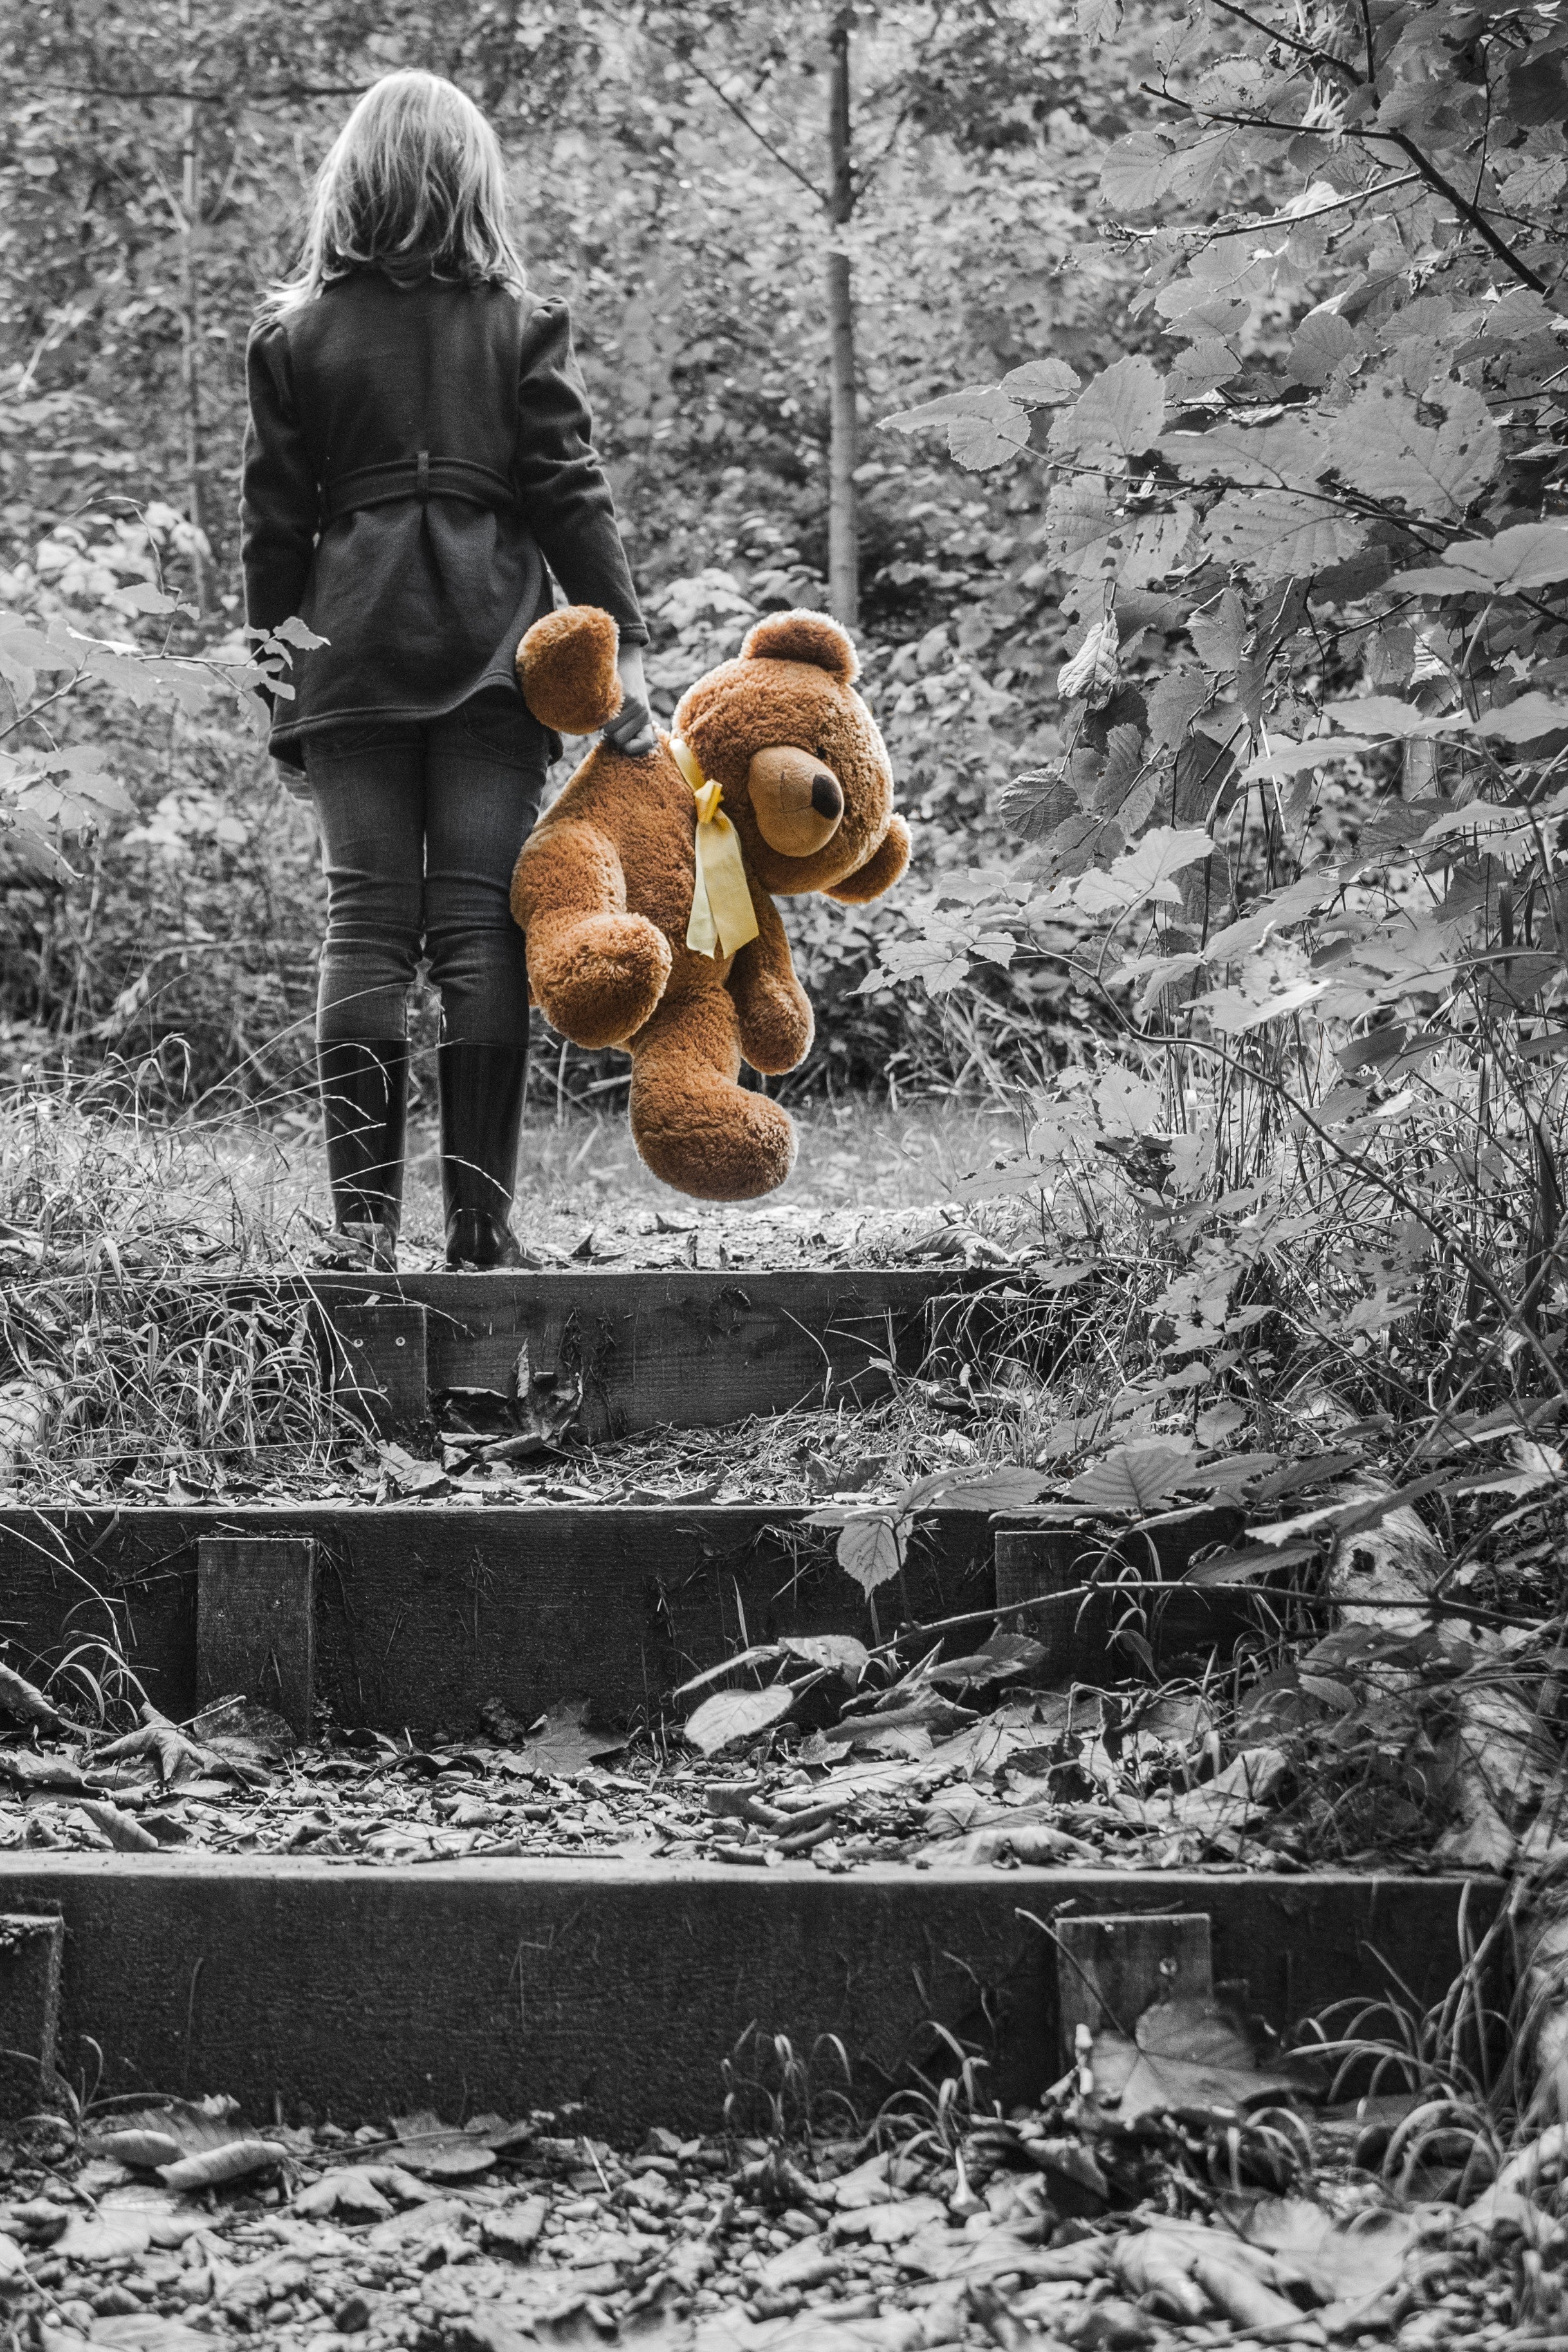 Girl in jacket carrying brown bear plush toy selective color photo